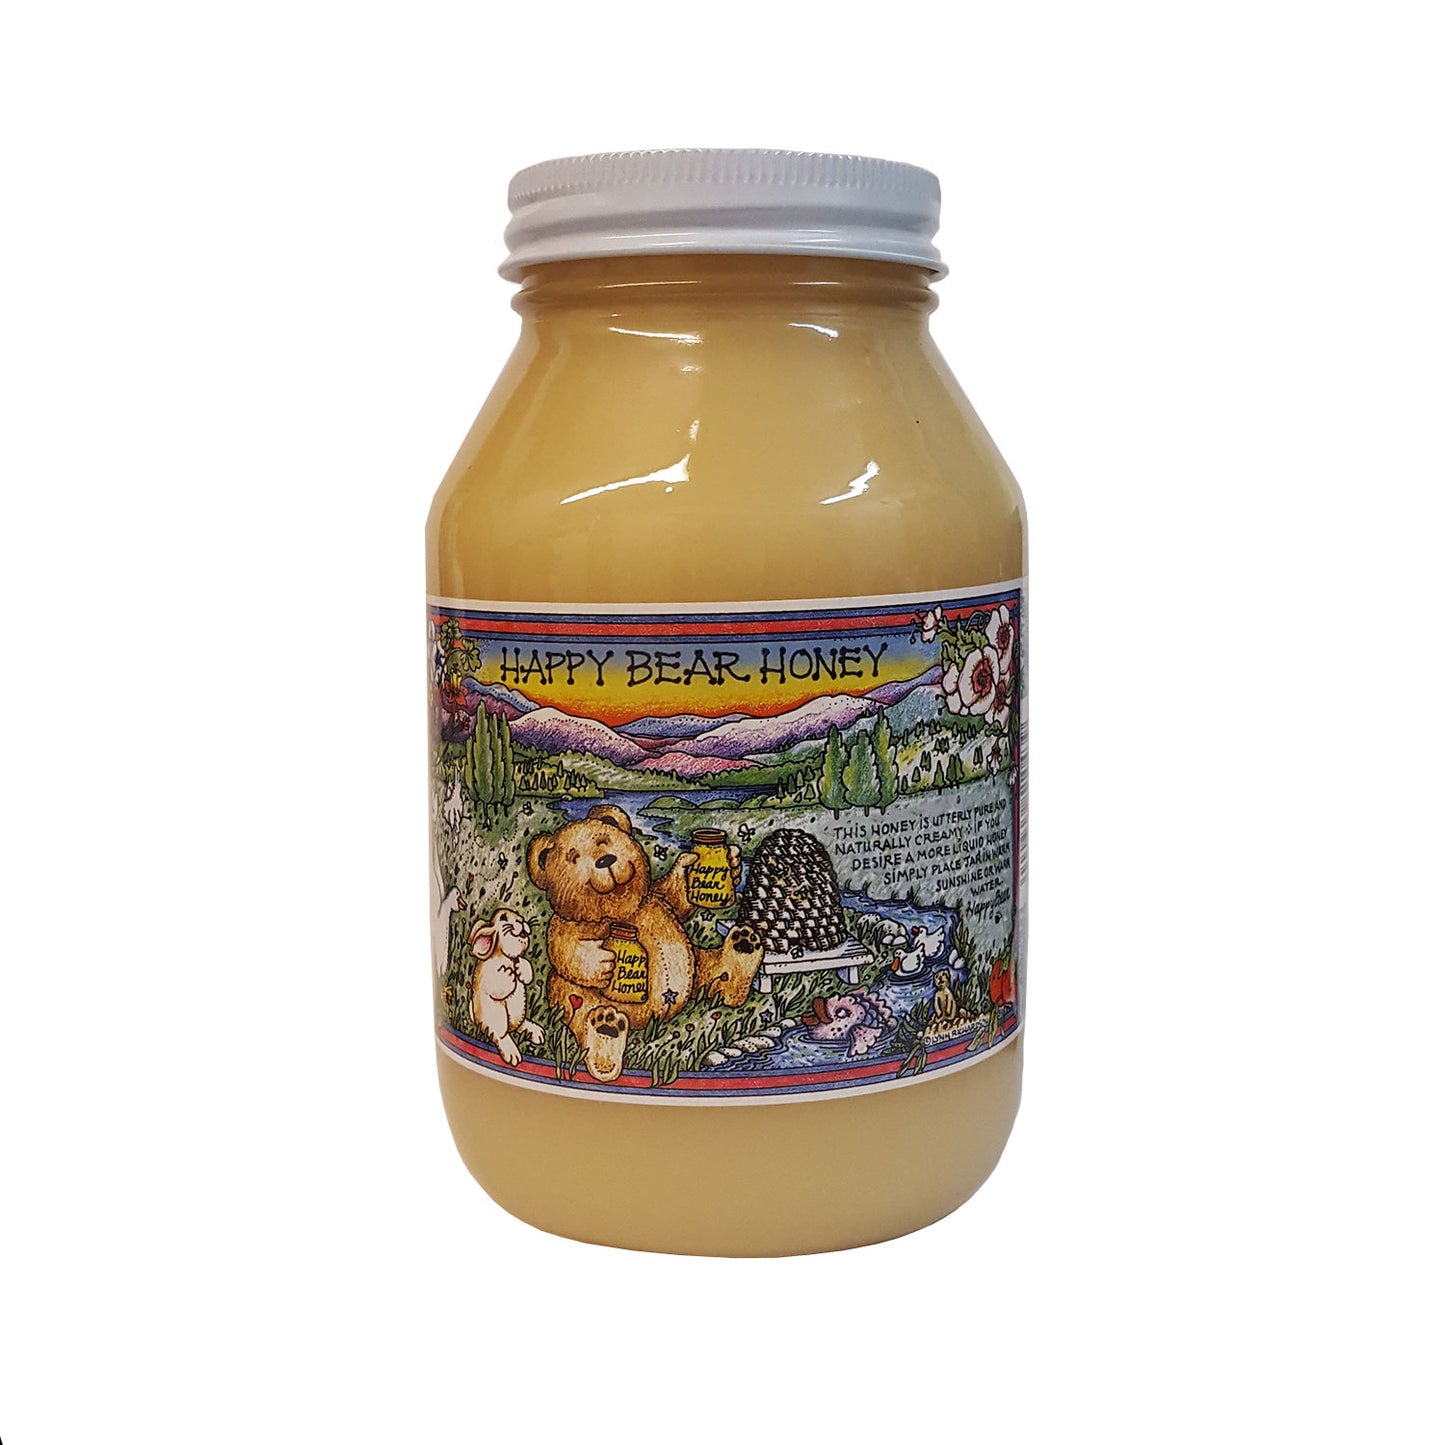 Raw, unheated, and unfiltered mesquite honey from Arizona. Available in 3 pound and 1 pound sizes